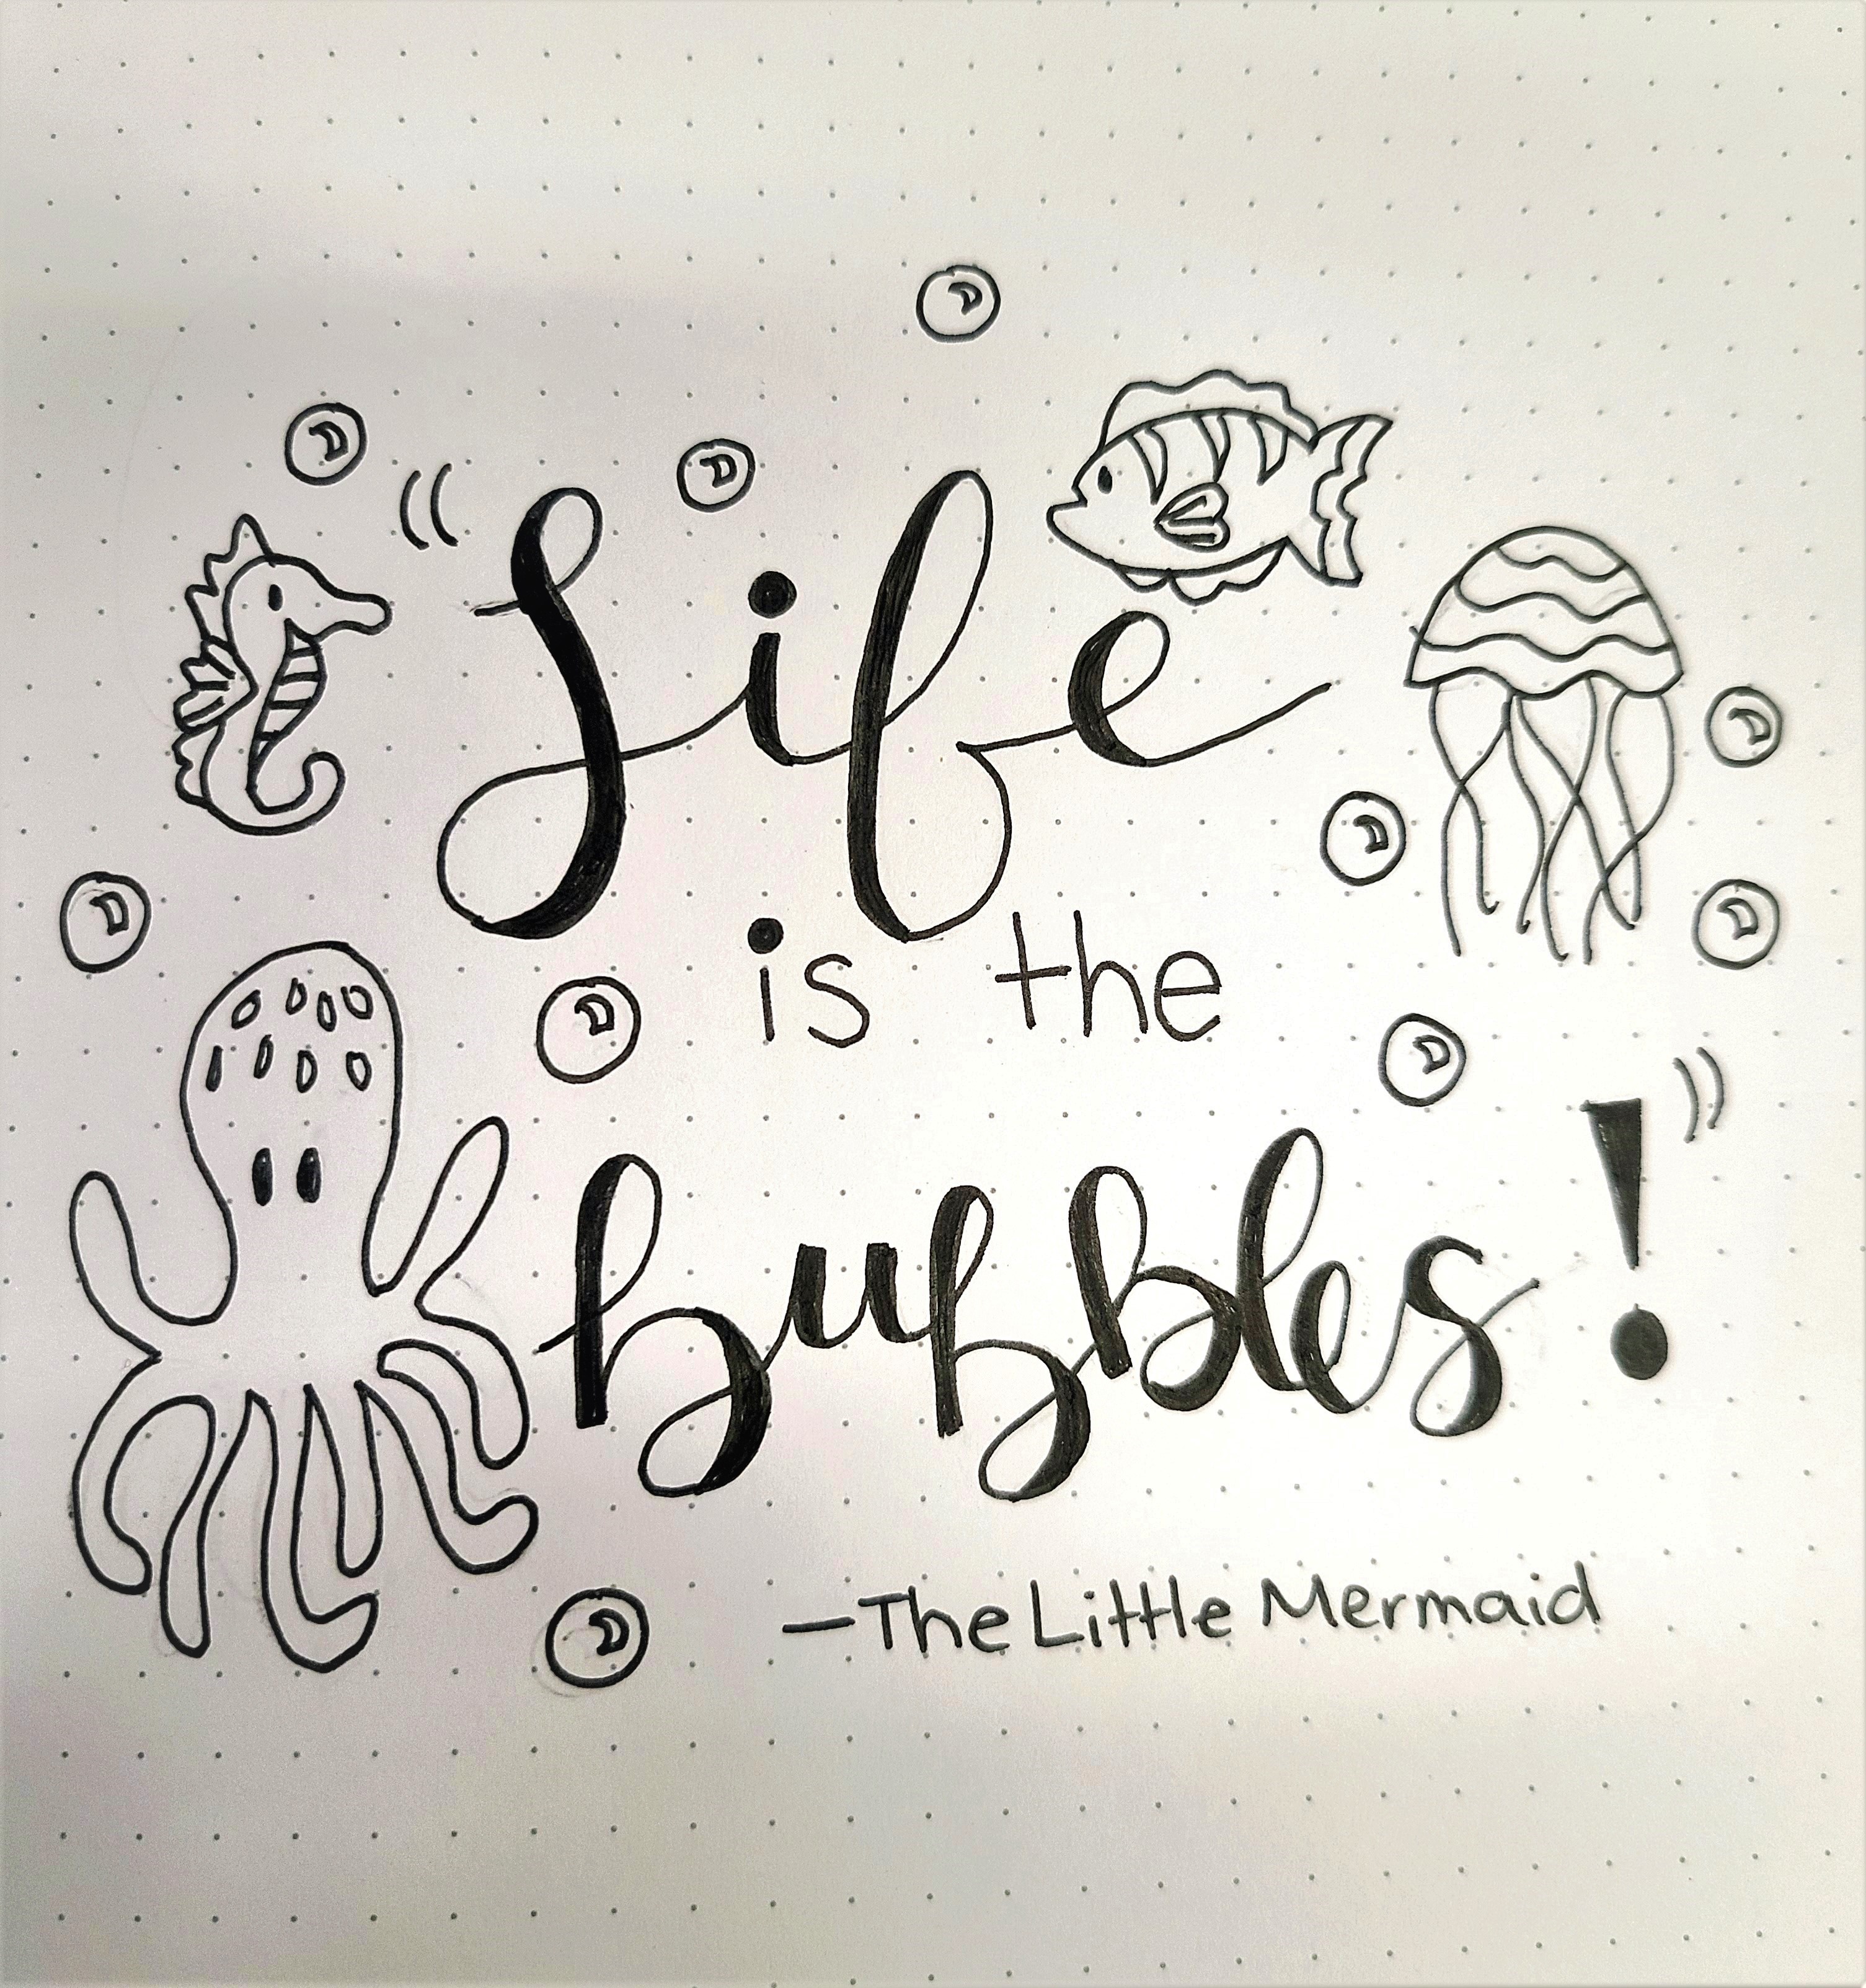 Text reading "Life is the bubbles! - The Little Mermaid" surrounded by sea creatures and bubbles